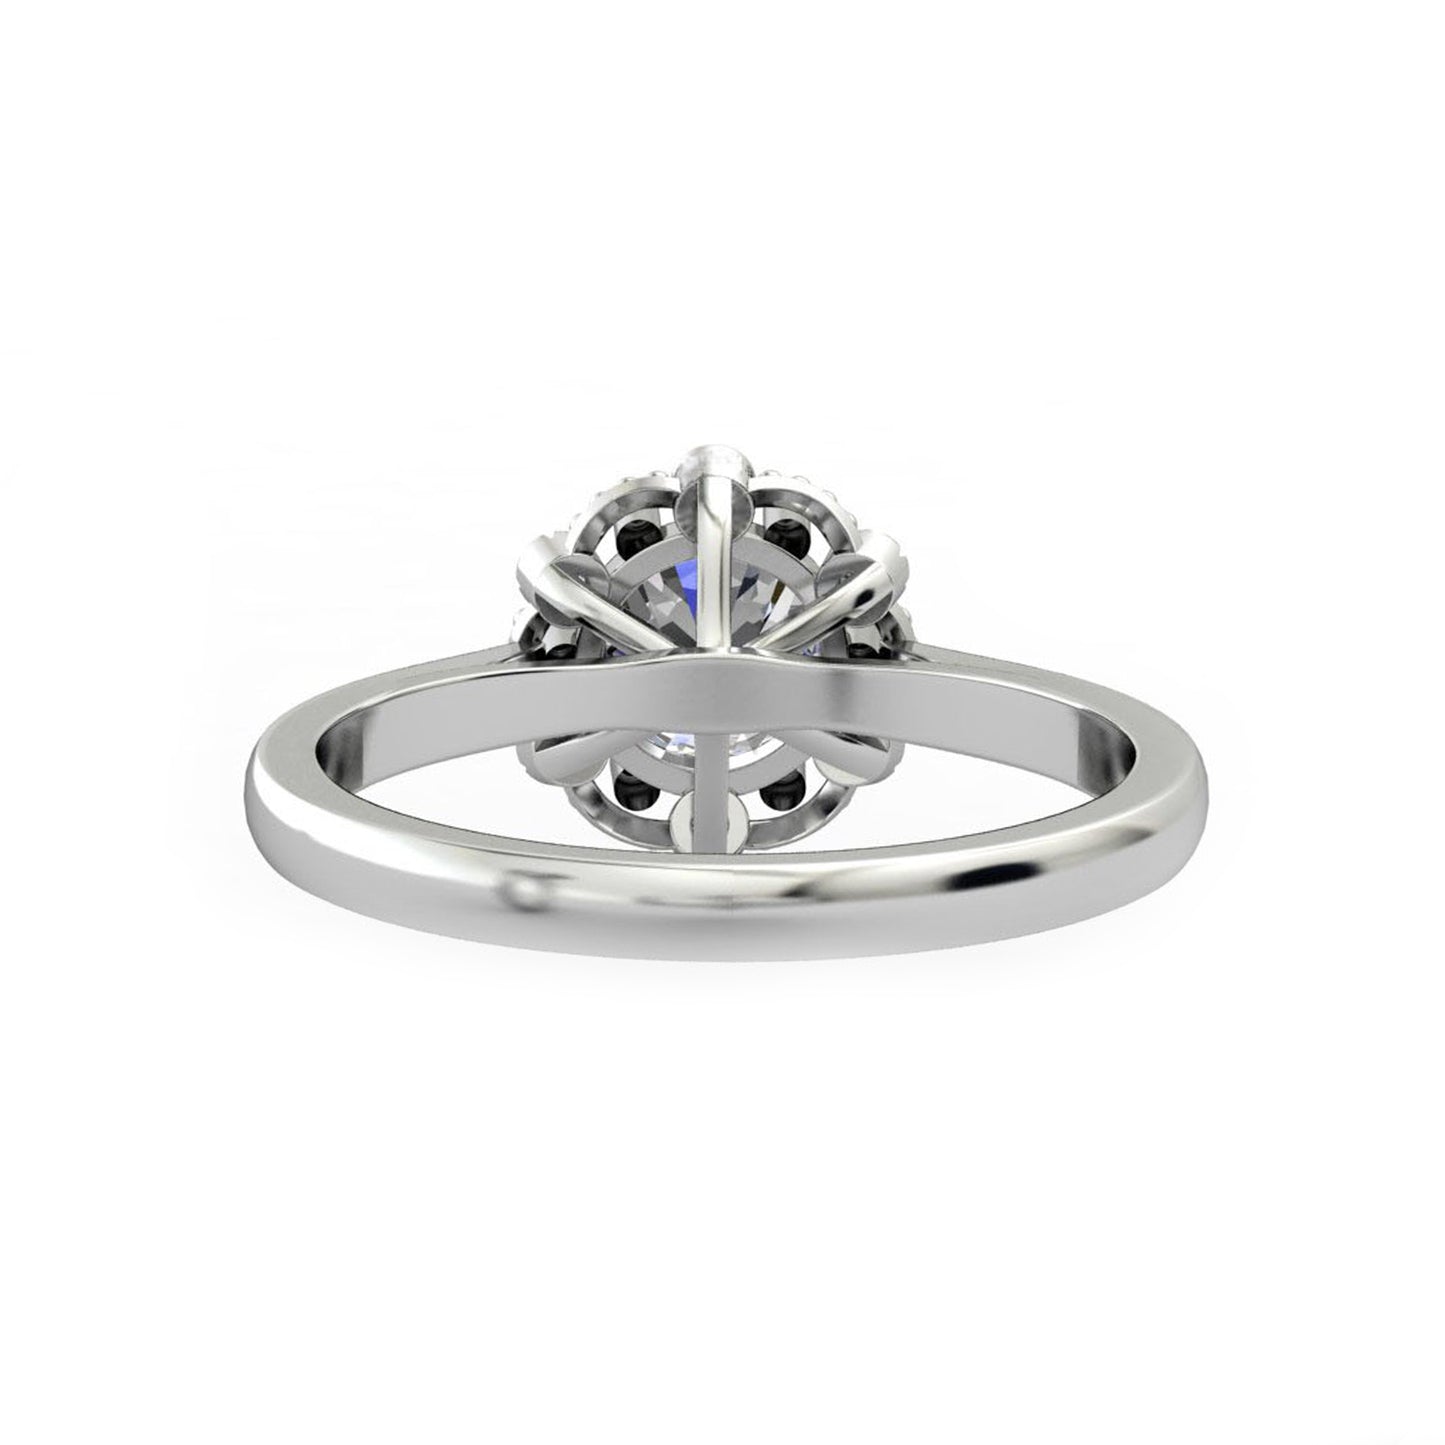 Dainty Prong Set Ring, 1.0CT Round Cut Colorless Moissanite Wedding Ring